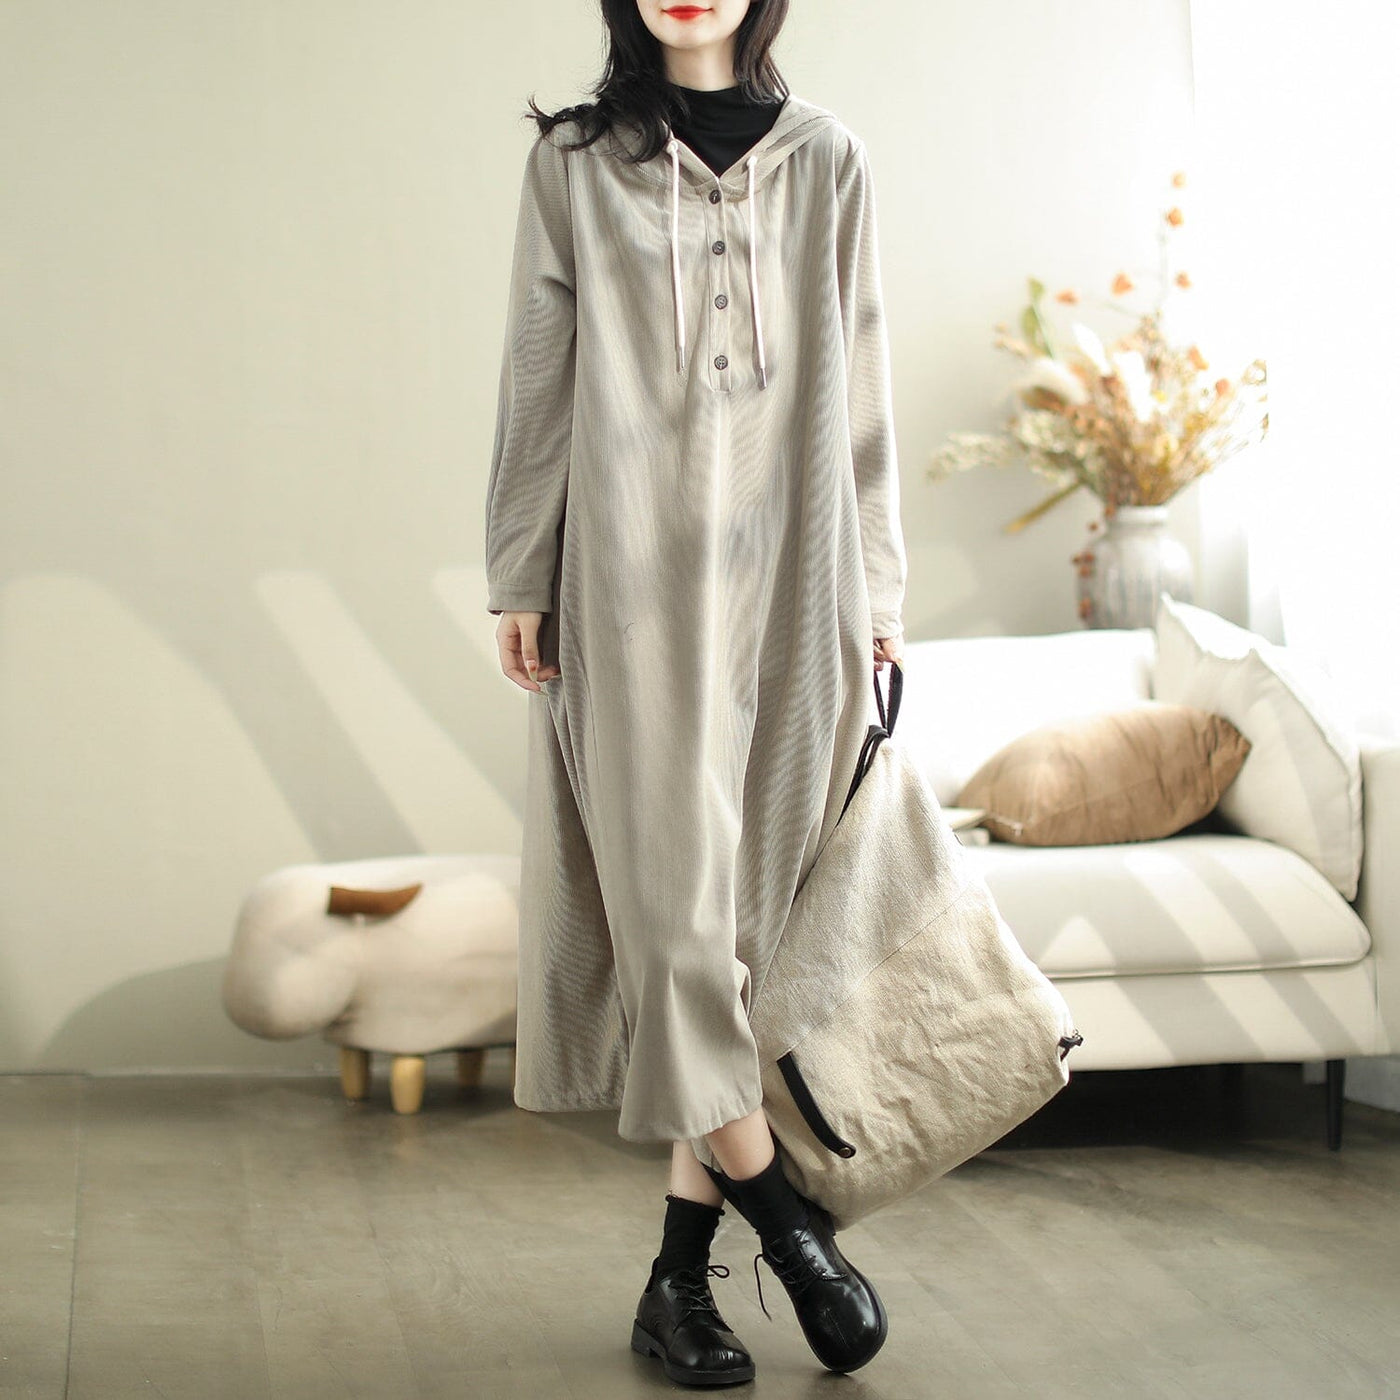 Autumn Casual Fashion Solid Stripe Cotton Dress Oct 2023 New Arrival 